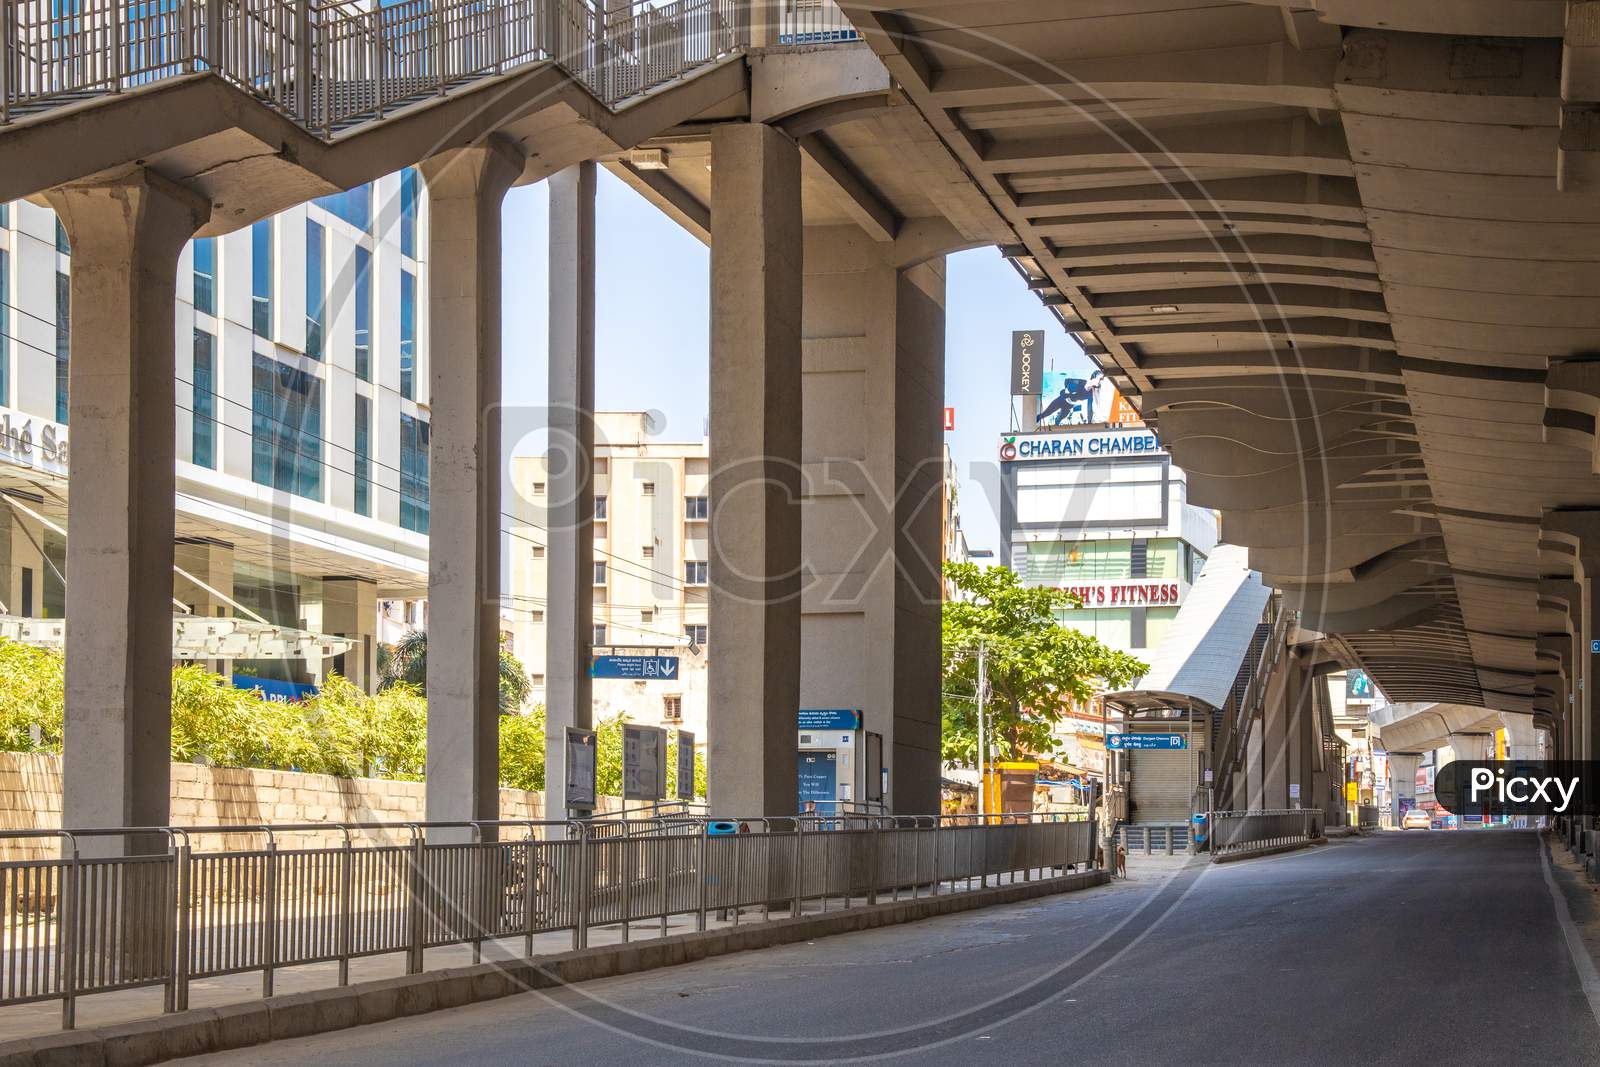 Janata Curfew , Deserted Roads At Durgam Cheruvu Metro Station  in Hyderabad  As Indian Prime Minister Narendra Modi Called For a 14 Hour Janta  Curfew Or Self-imposed  Quarantine To Break The  Highly Contagious  COVID 19 Or Corona Virus Spread